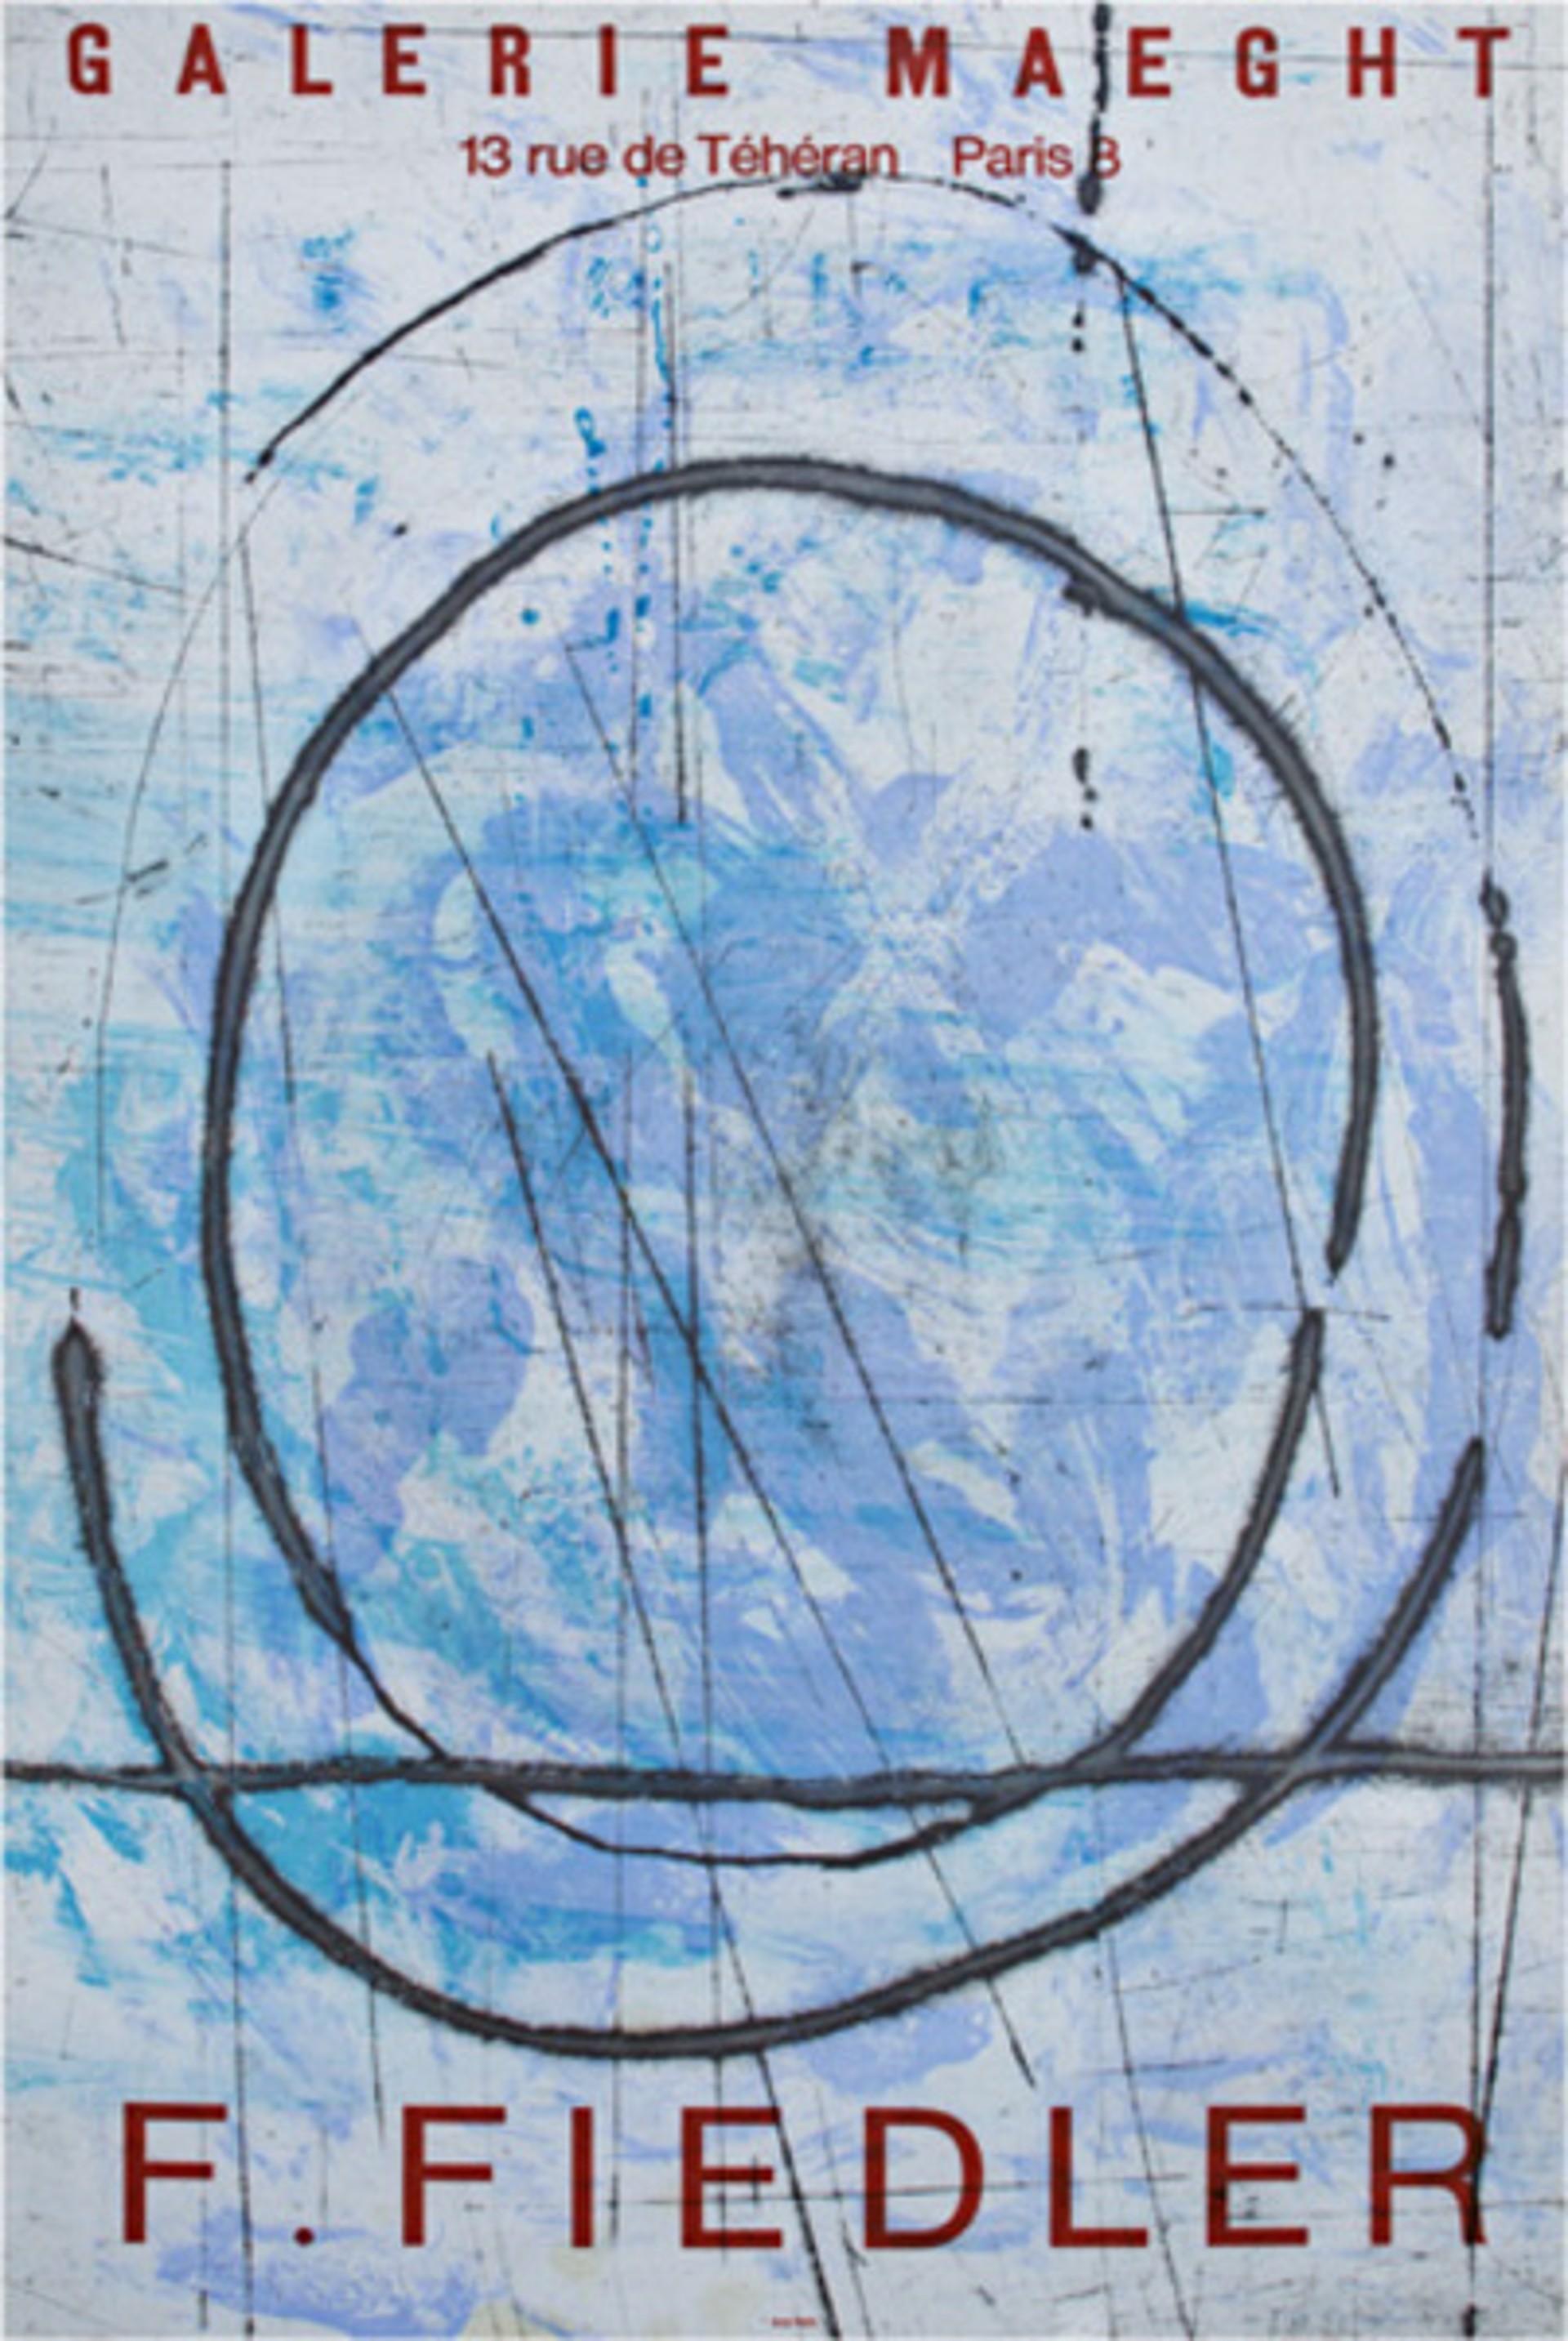 Abstract Composition in Blue by Francois Fiedler